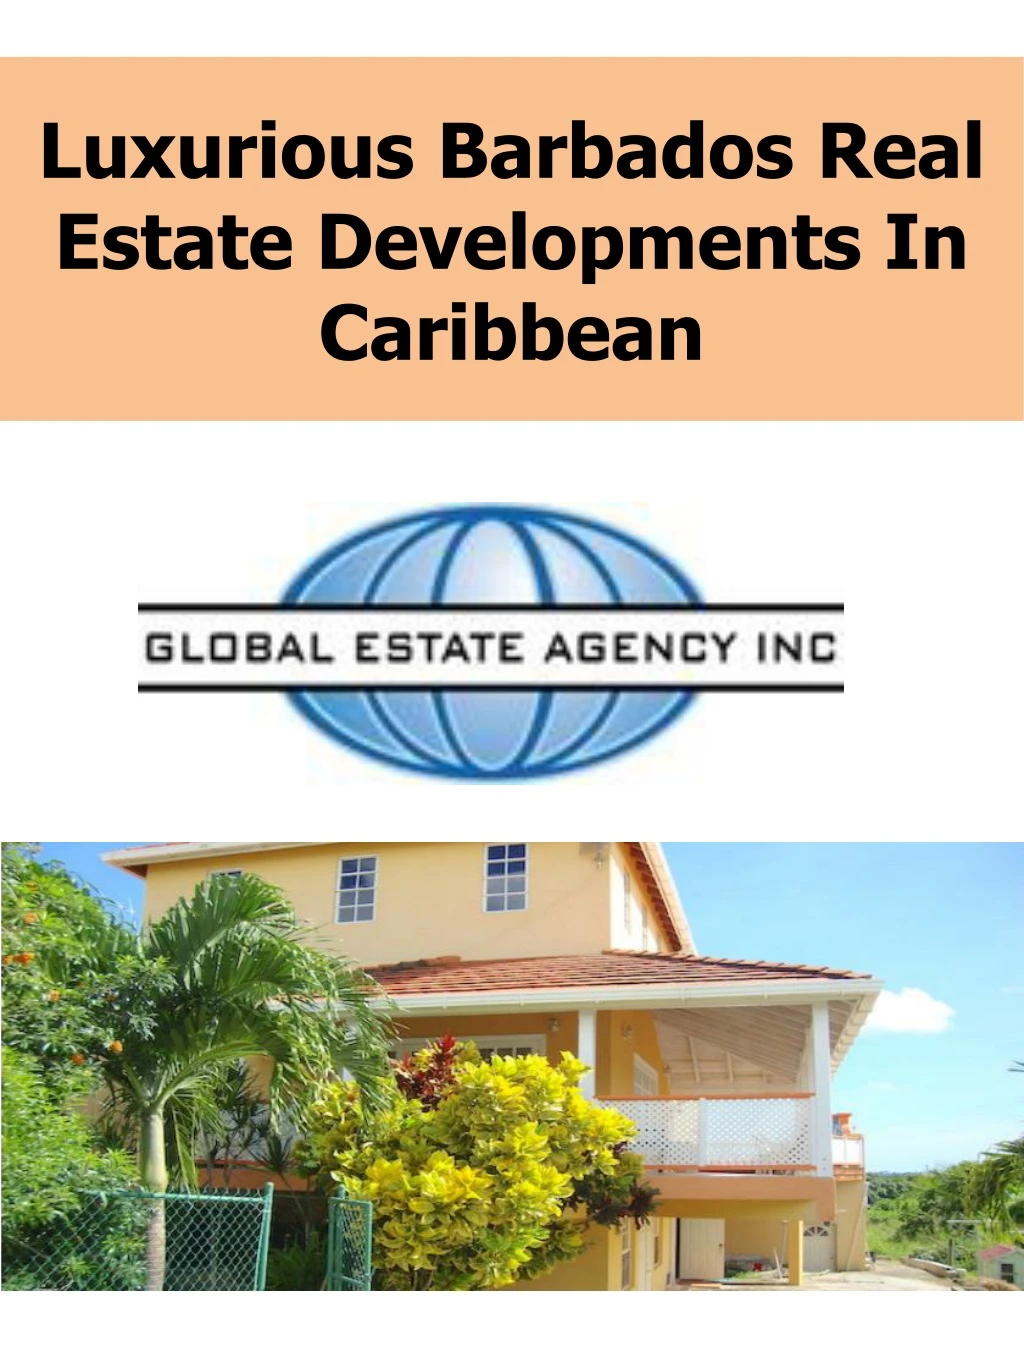 luxurious barbados real estate developments in caribbean